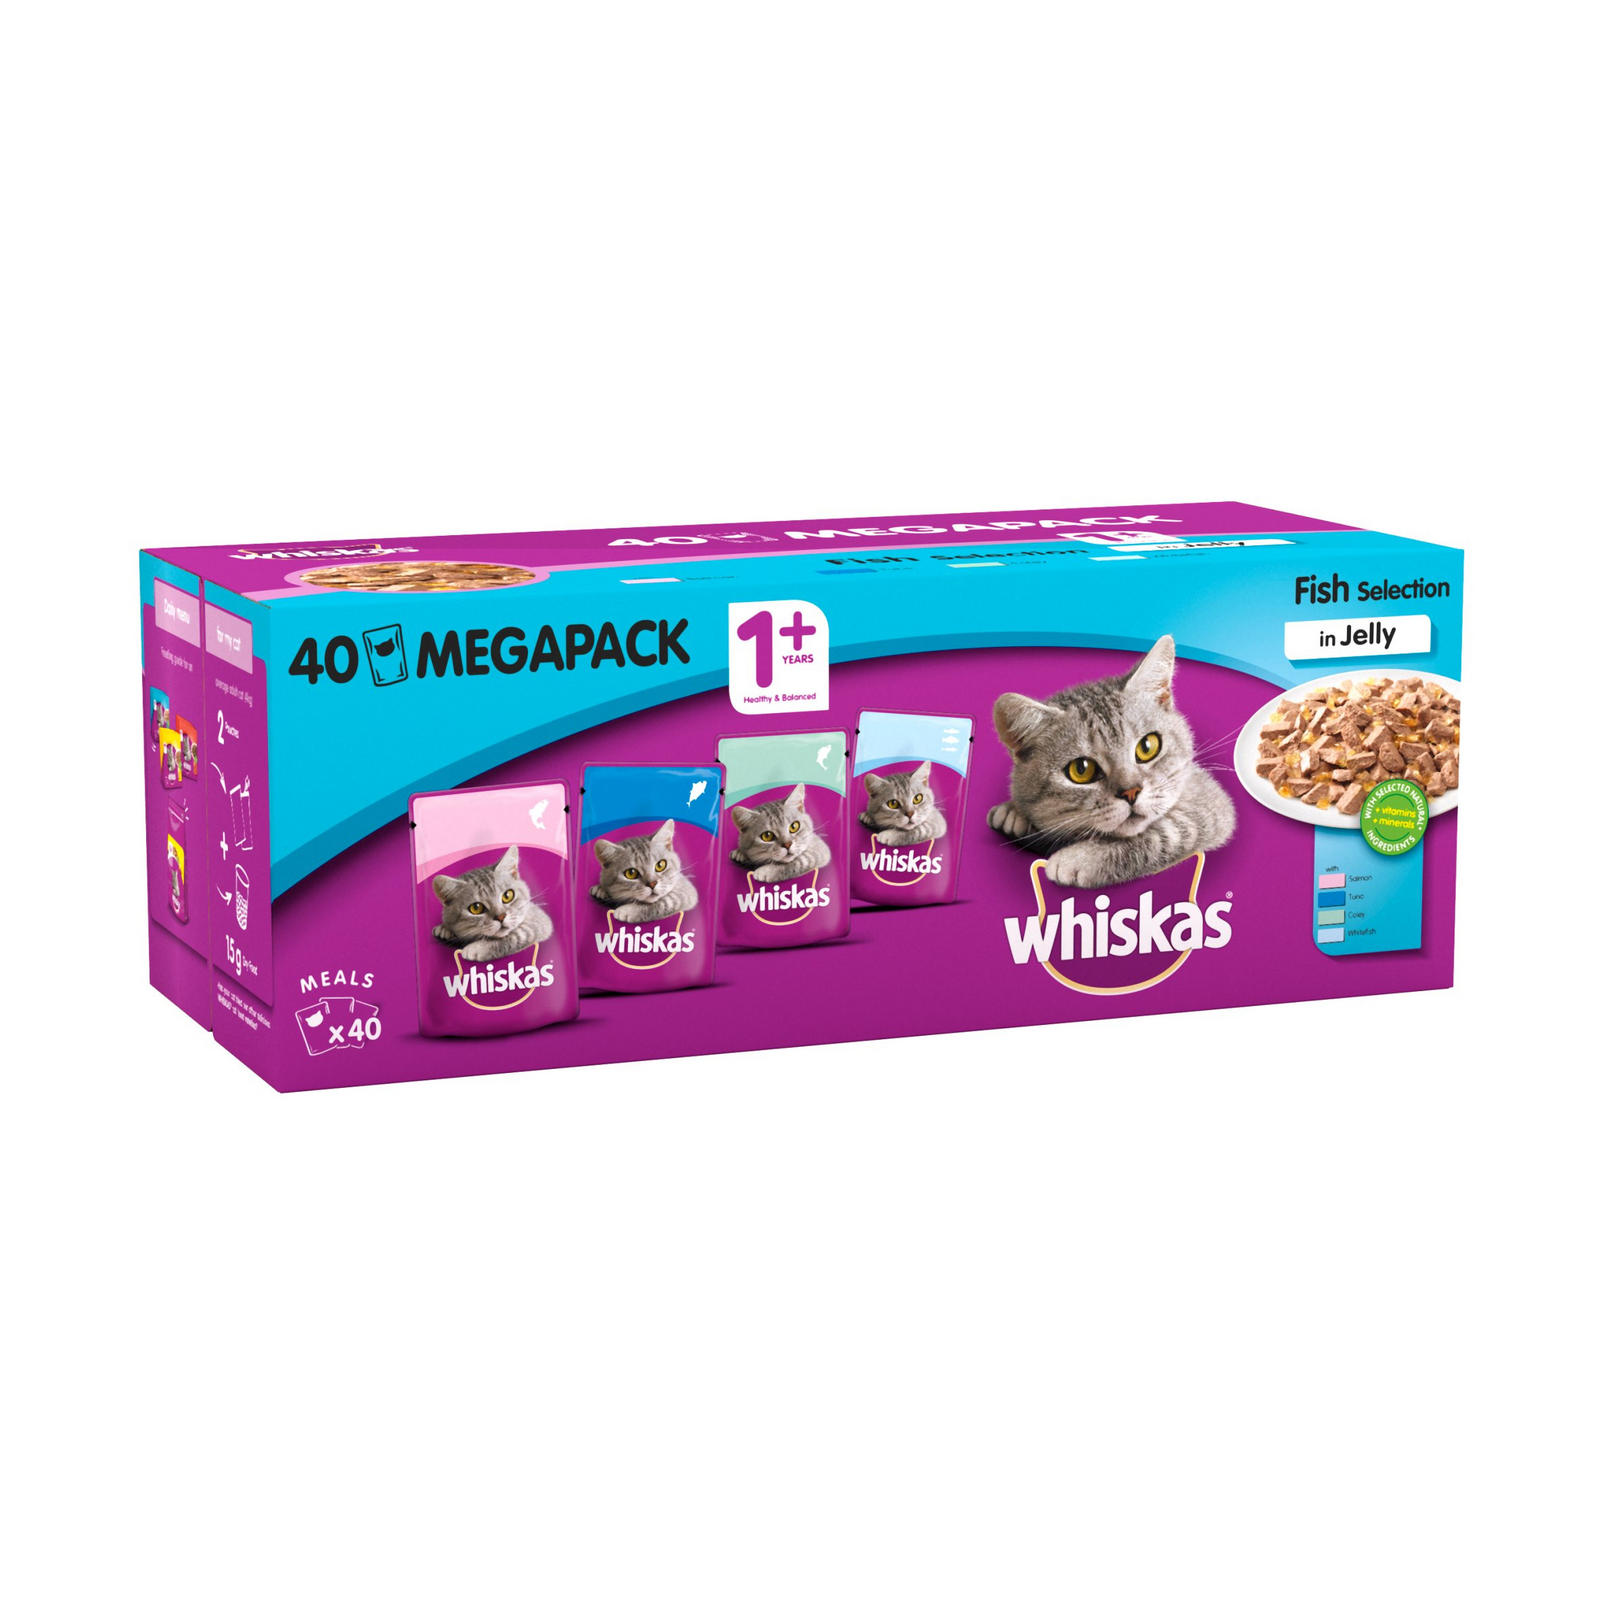 whiskas-adult-wet-cat-food-pouches-fish-in-jelly-mega-pack-40-x-100g-72277-T1.jpg